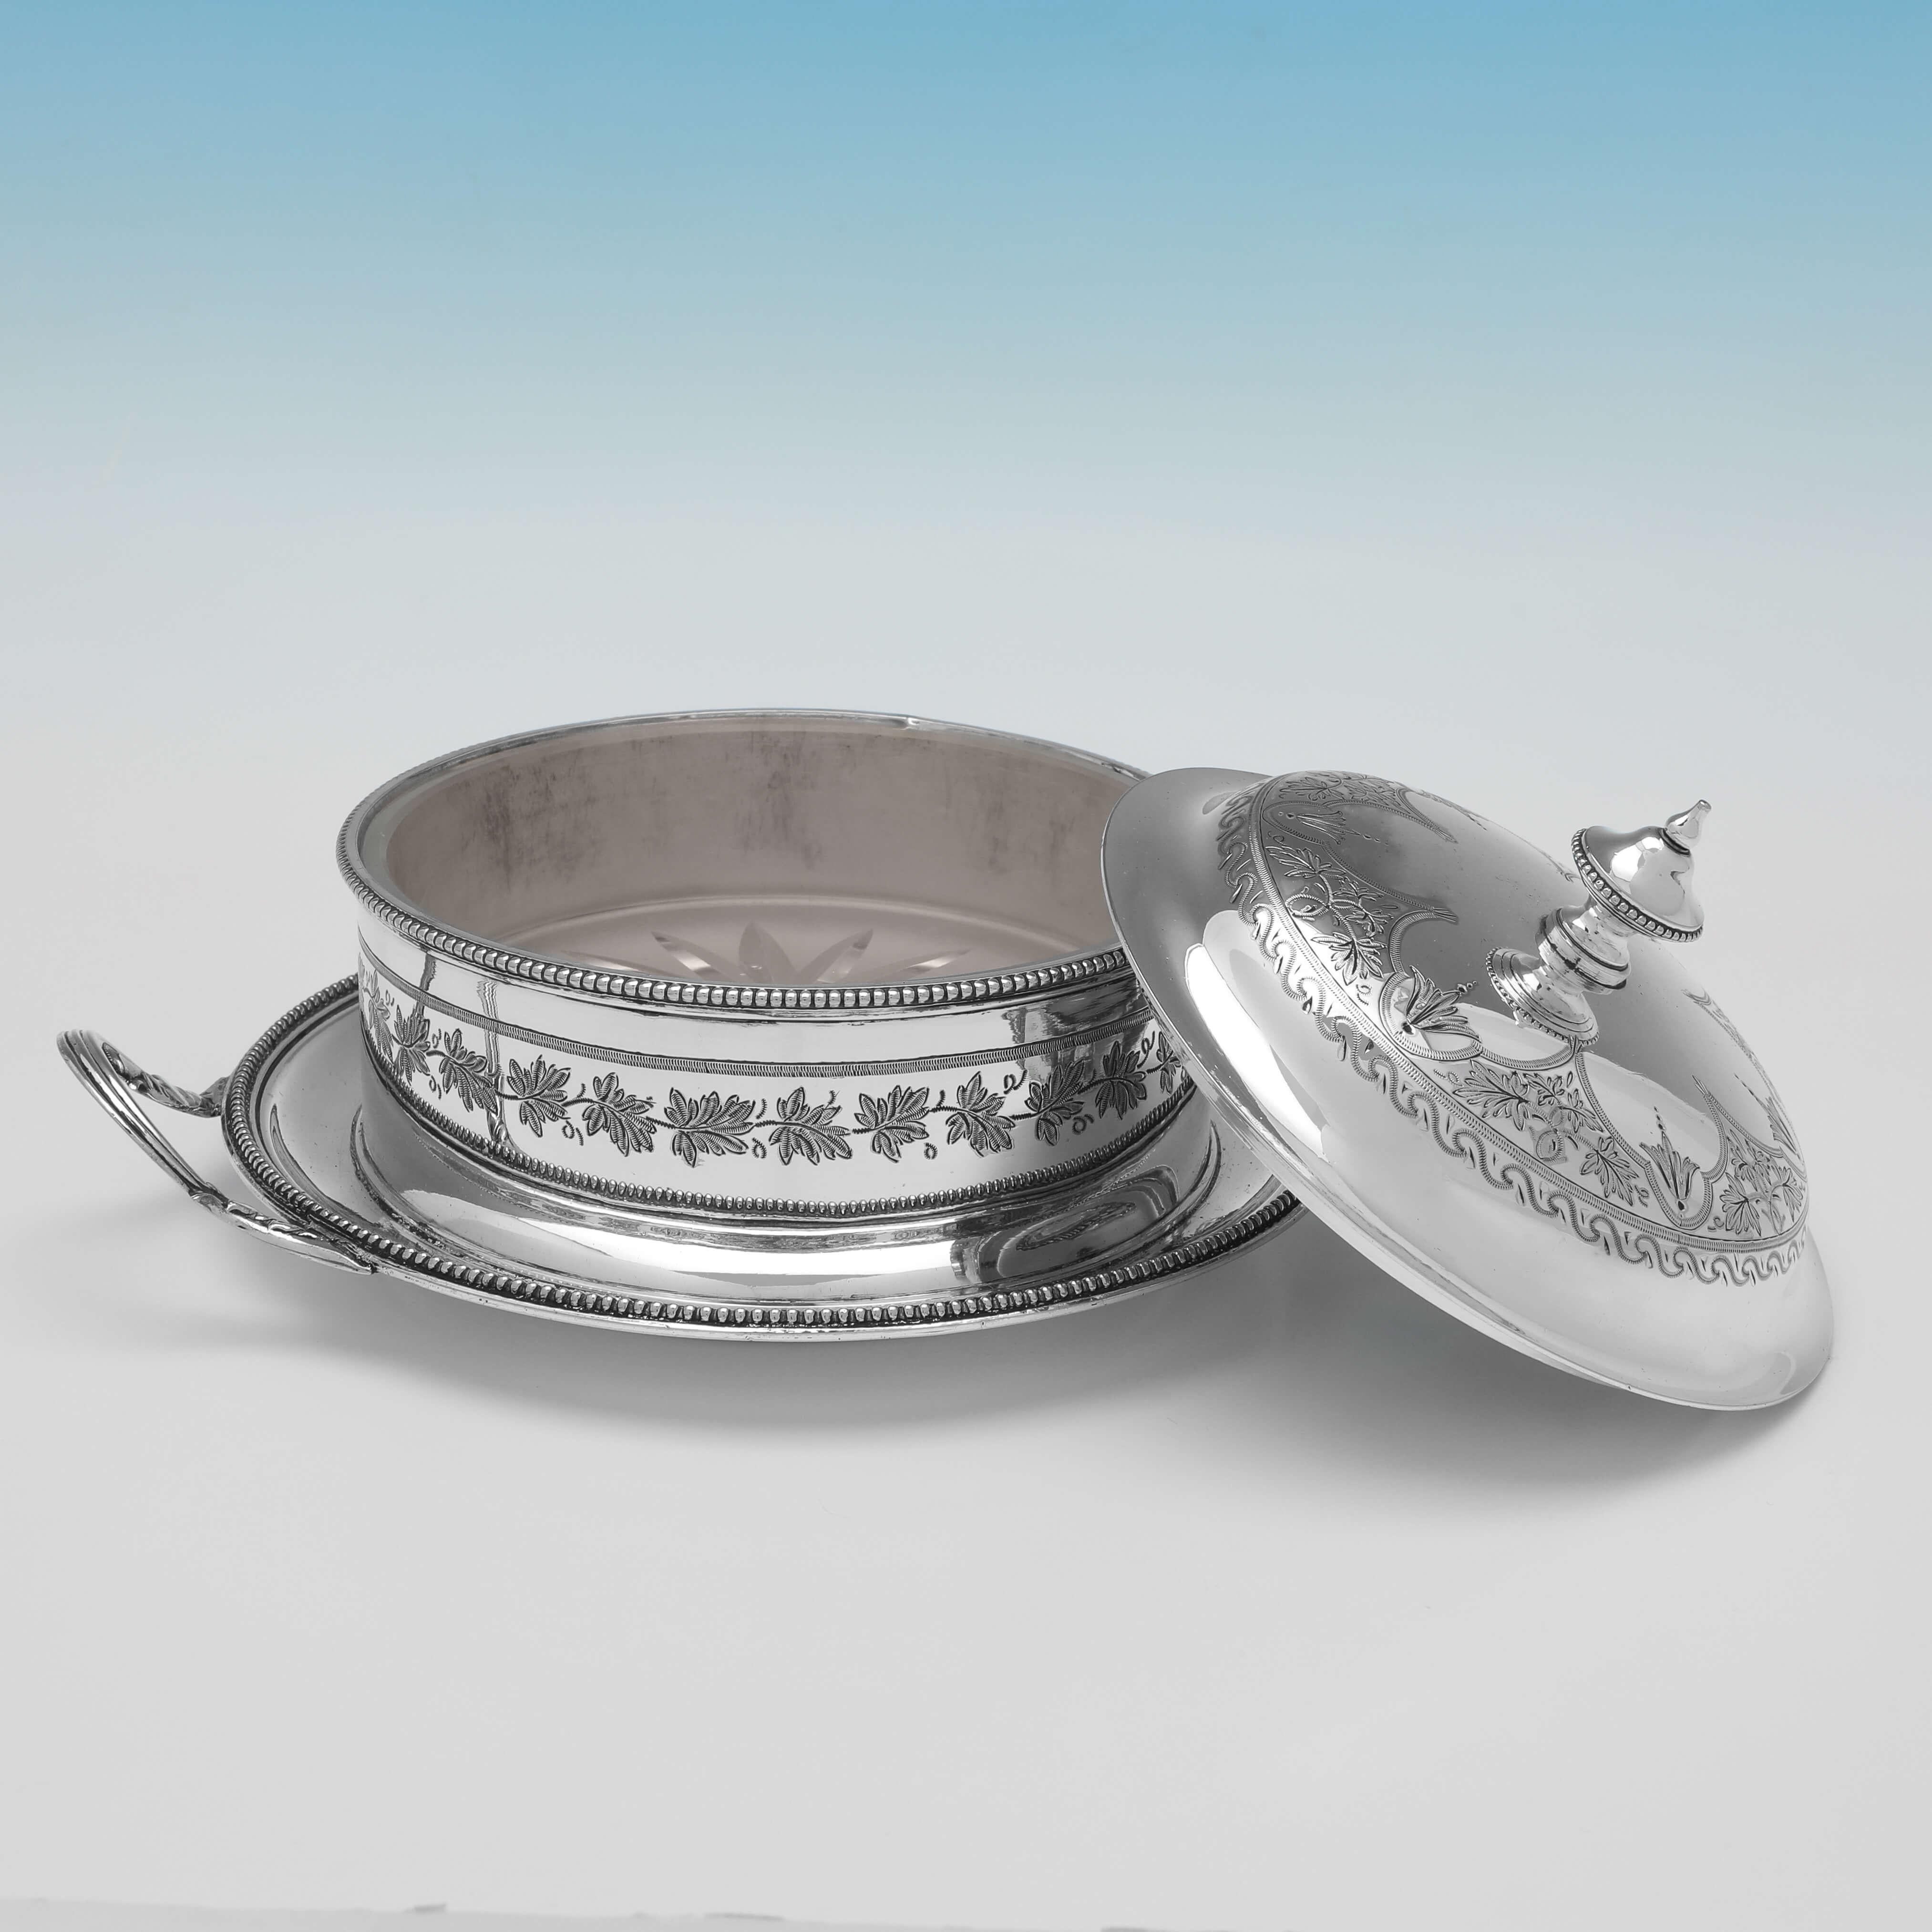 Made circa 1880 by Henry Wilkinson & Co, this attractive, Victorian, Antique Silver Plated Butter Dish, is straight sided, and features engraved decoration throughout, bead borders, and a glass liner. The butter dish measures 4.5